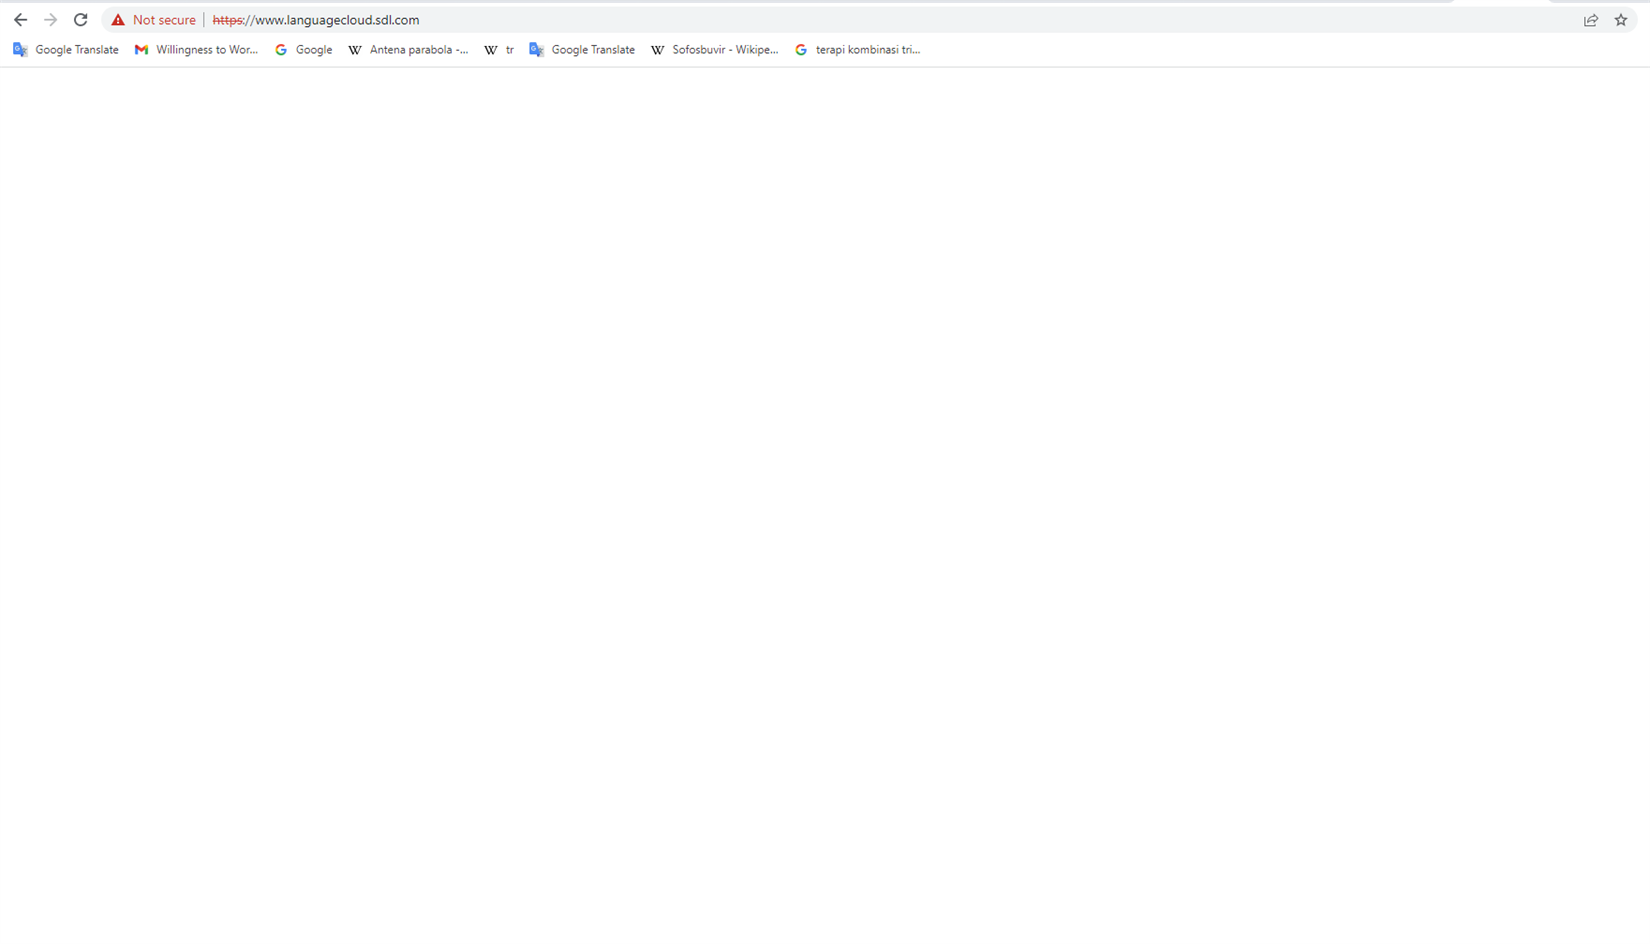 Web browser displaying a blank page with the address bar showing 'https:www.languagecloud.sdl.com'.